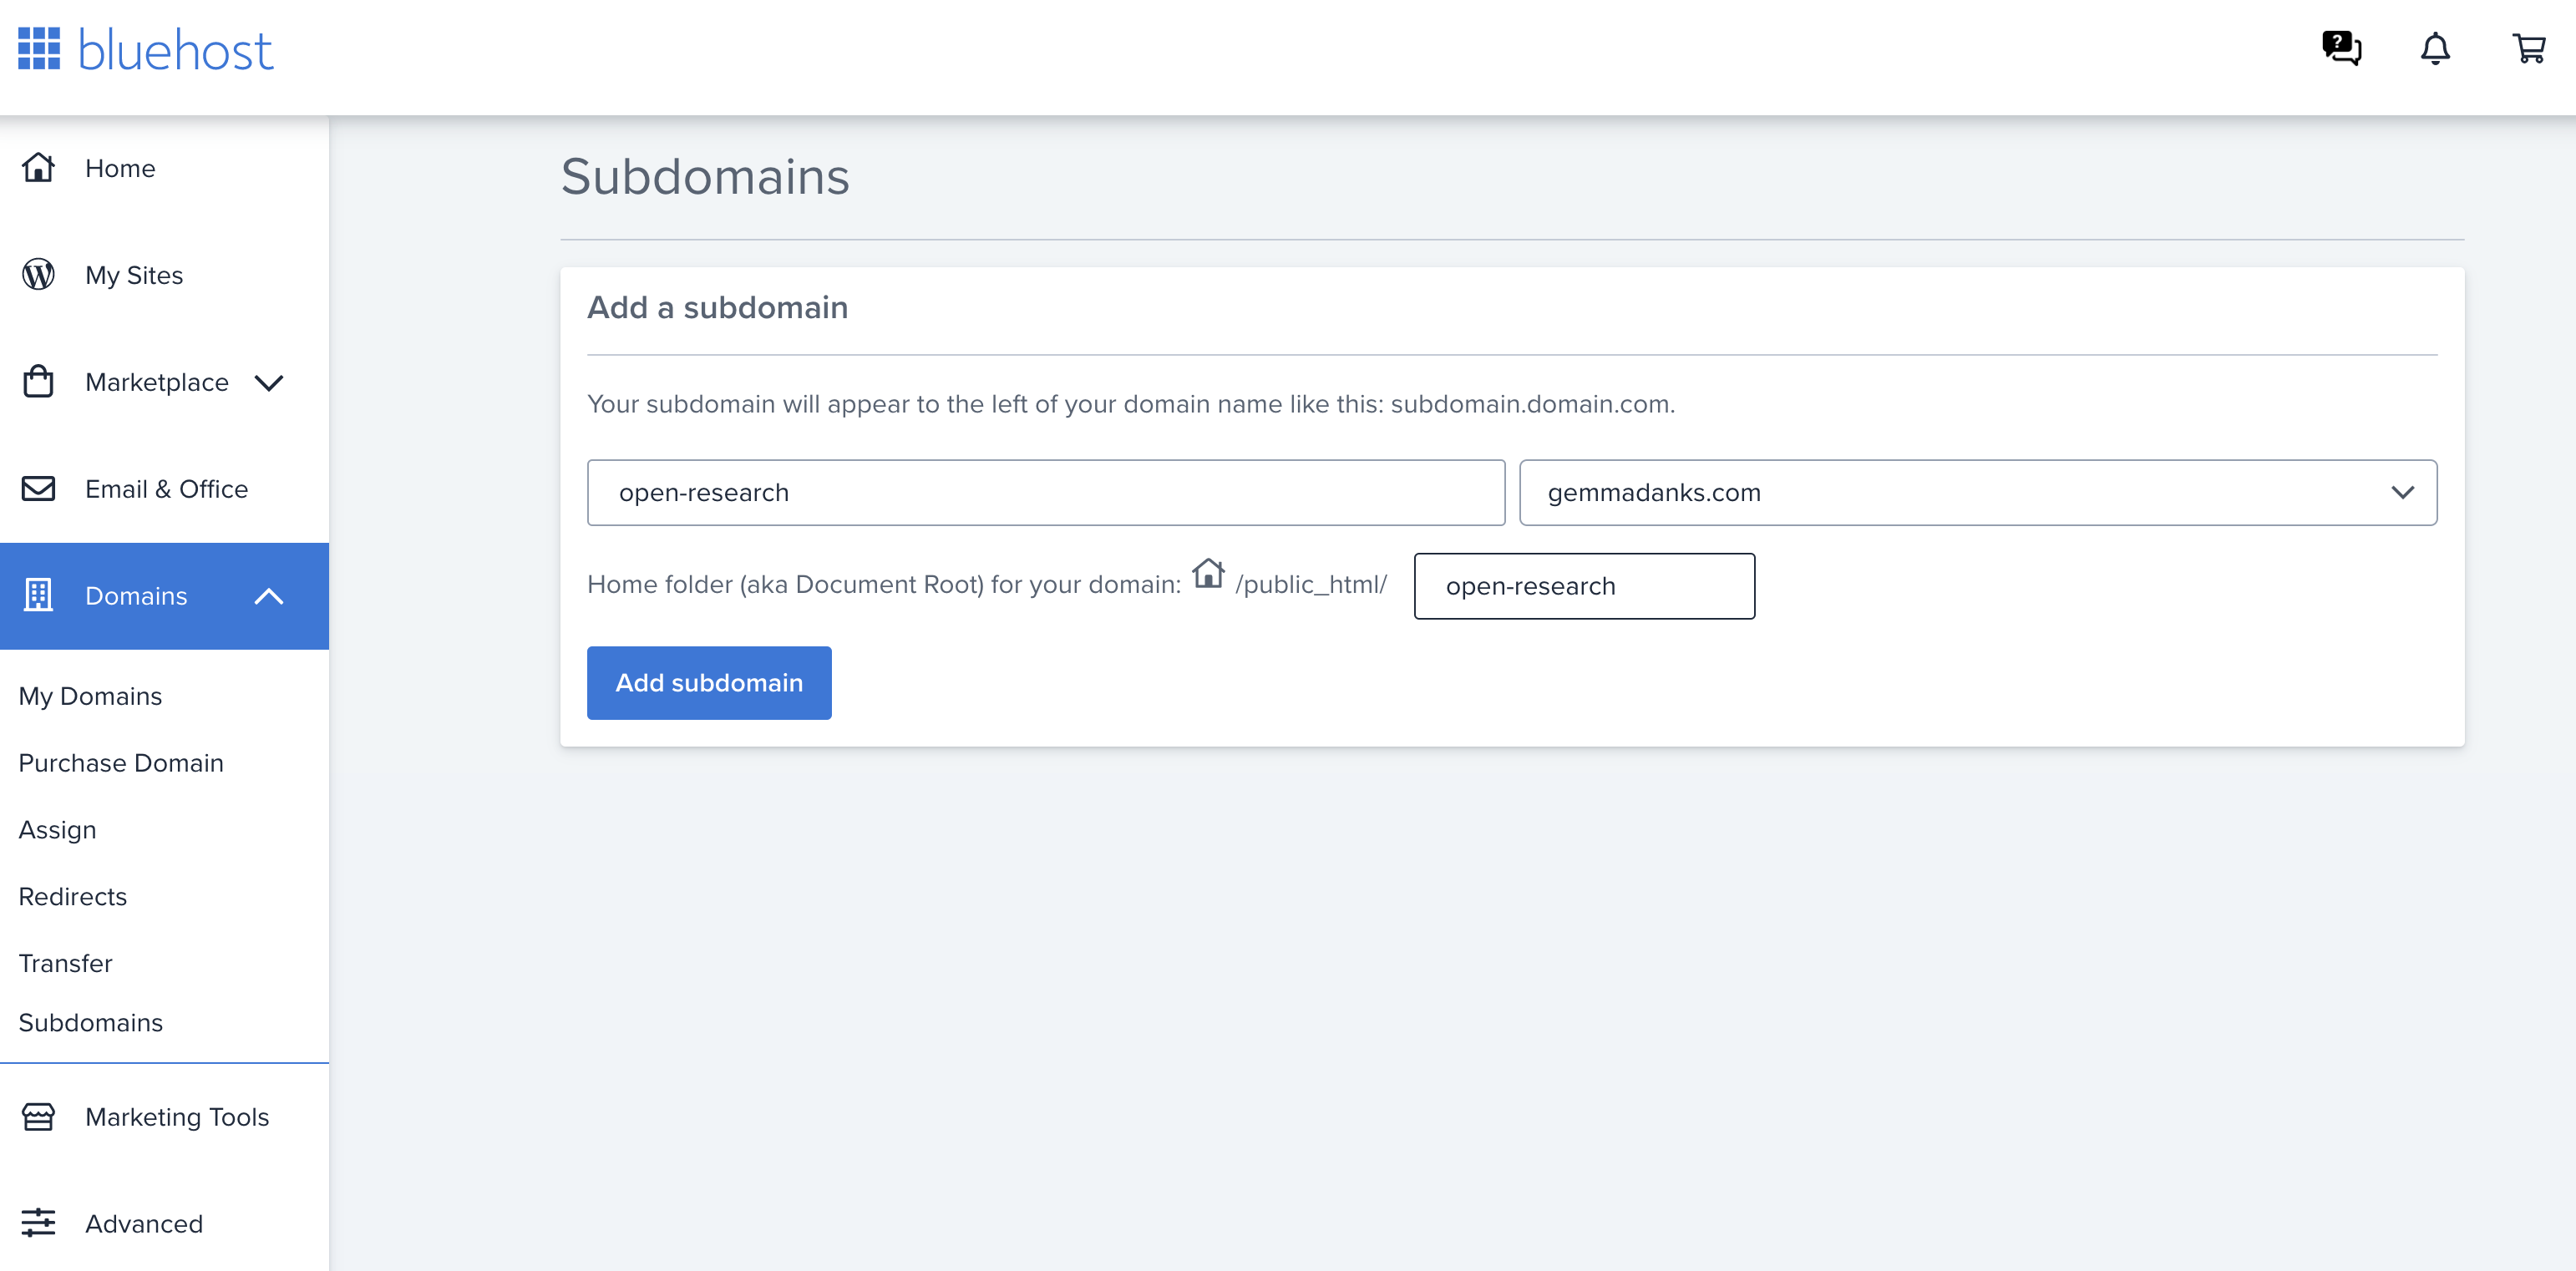 Creating a subdomain on Bluehost